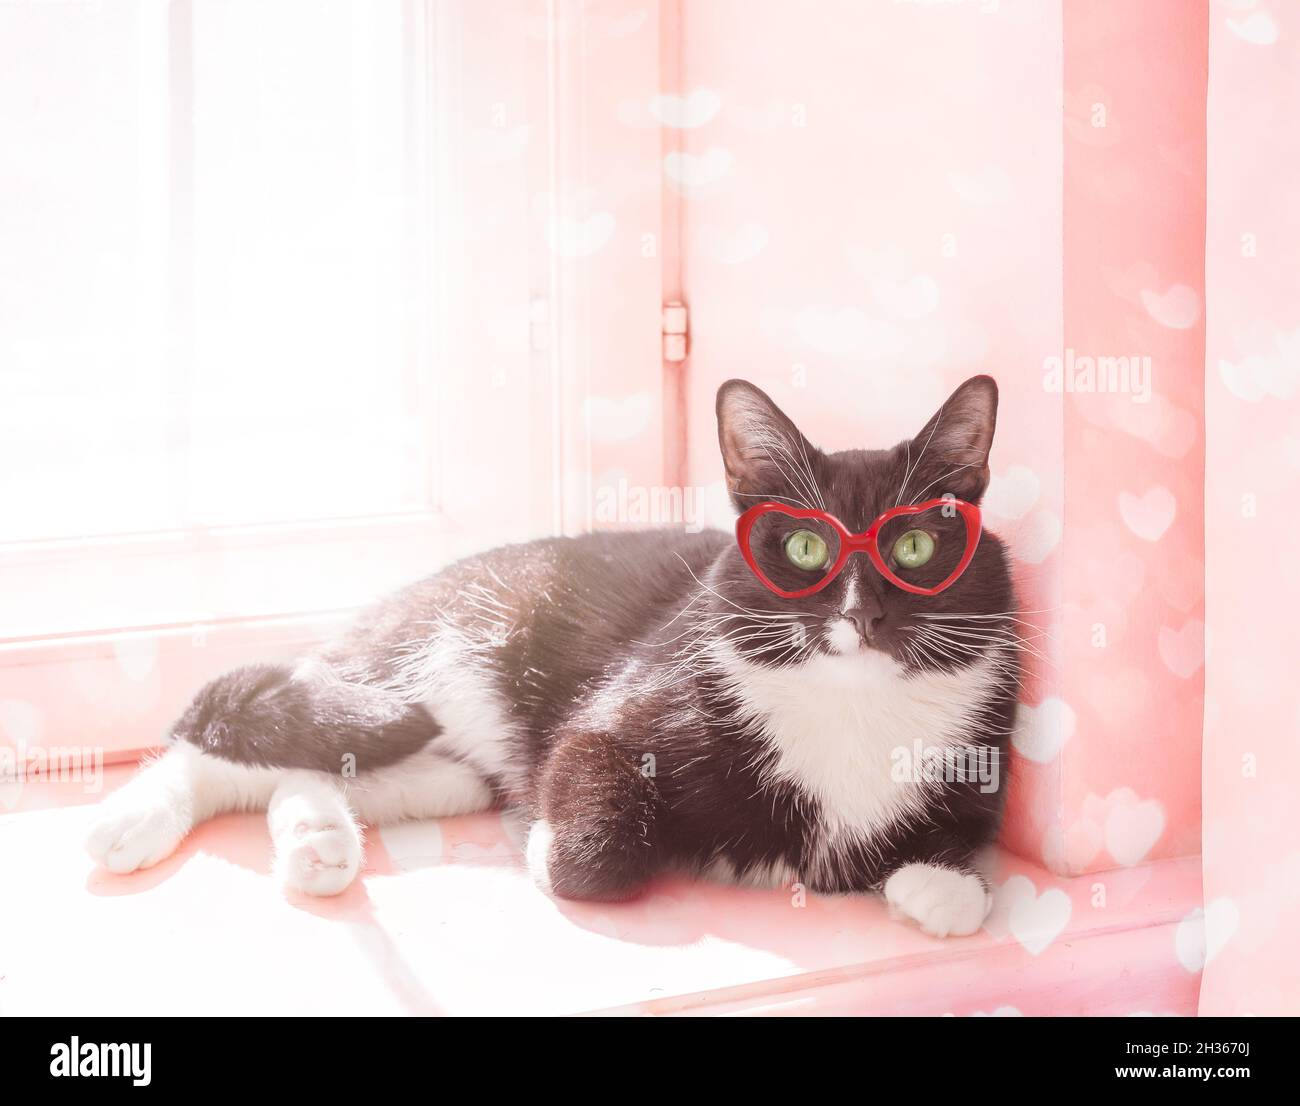 Amusing black and white cat in red glasses of heart shape is lying on sunlit windowsill and looking at camera. Valentines day pink toned with hearts b Stock Photo